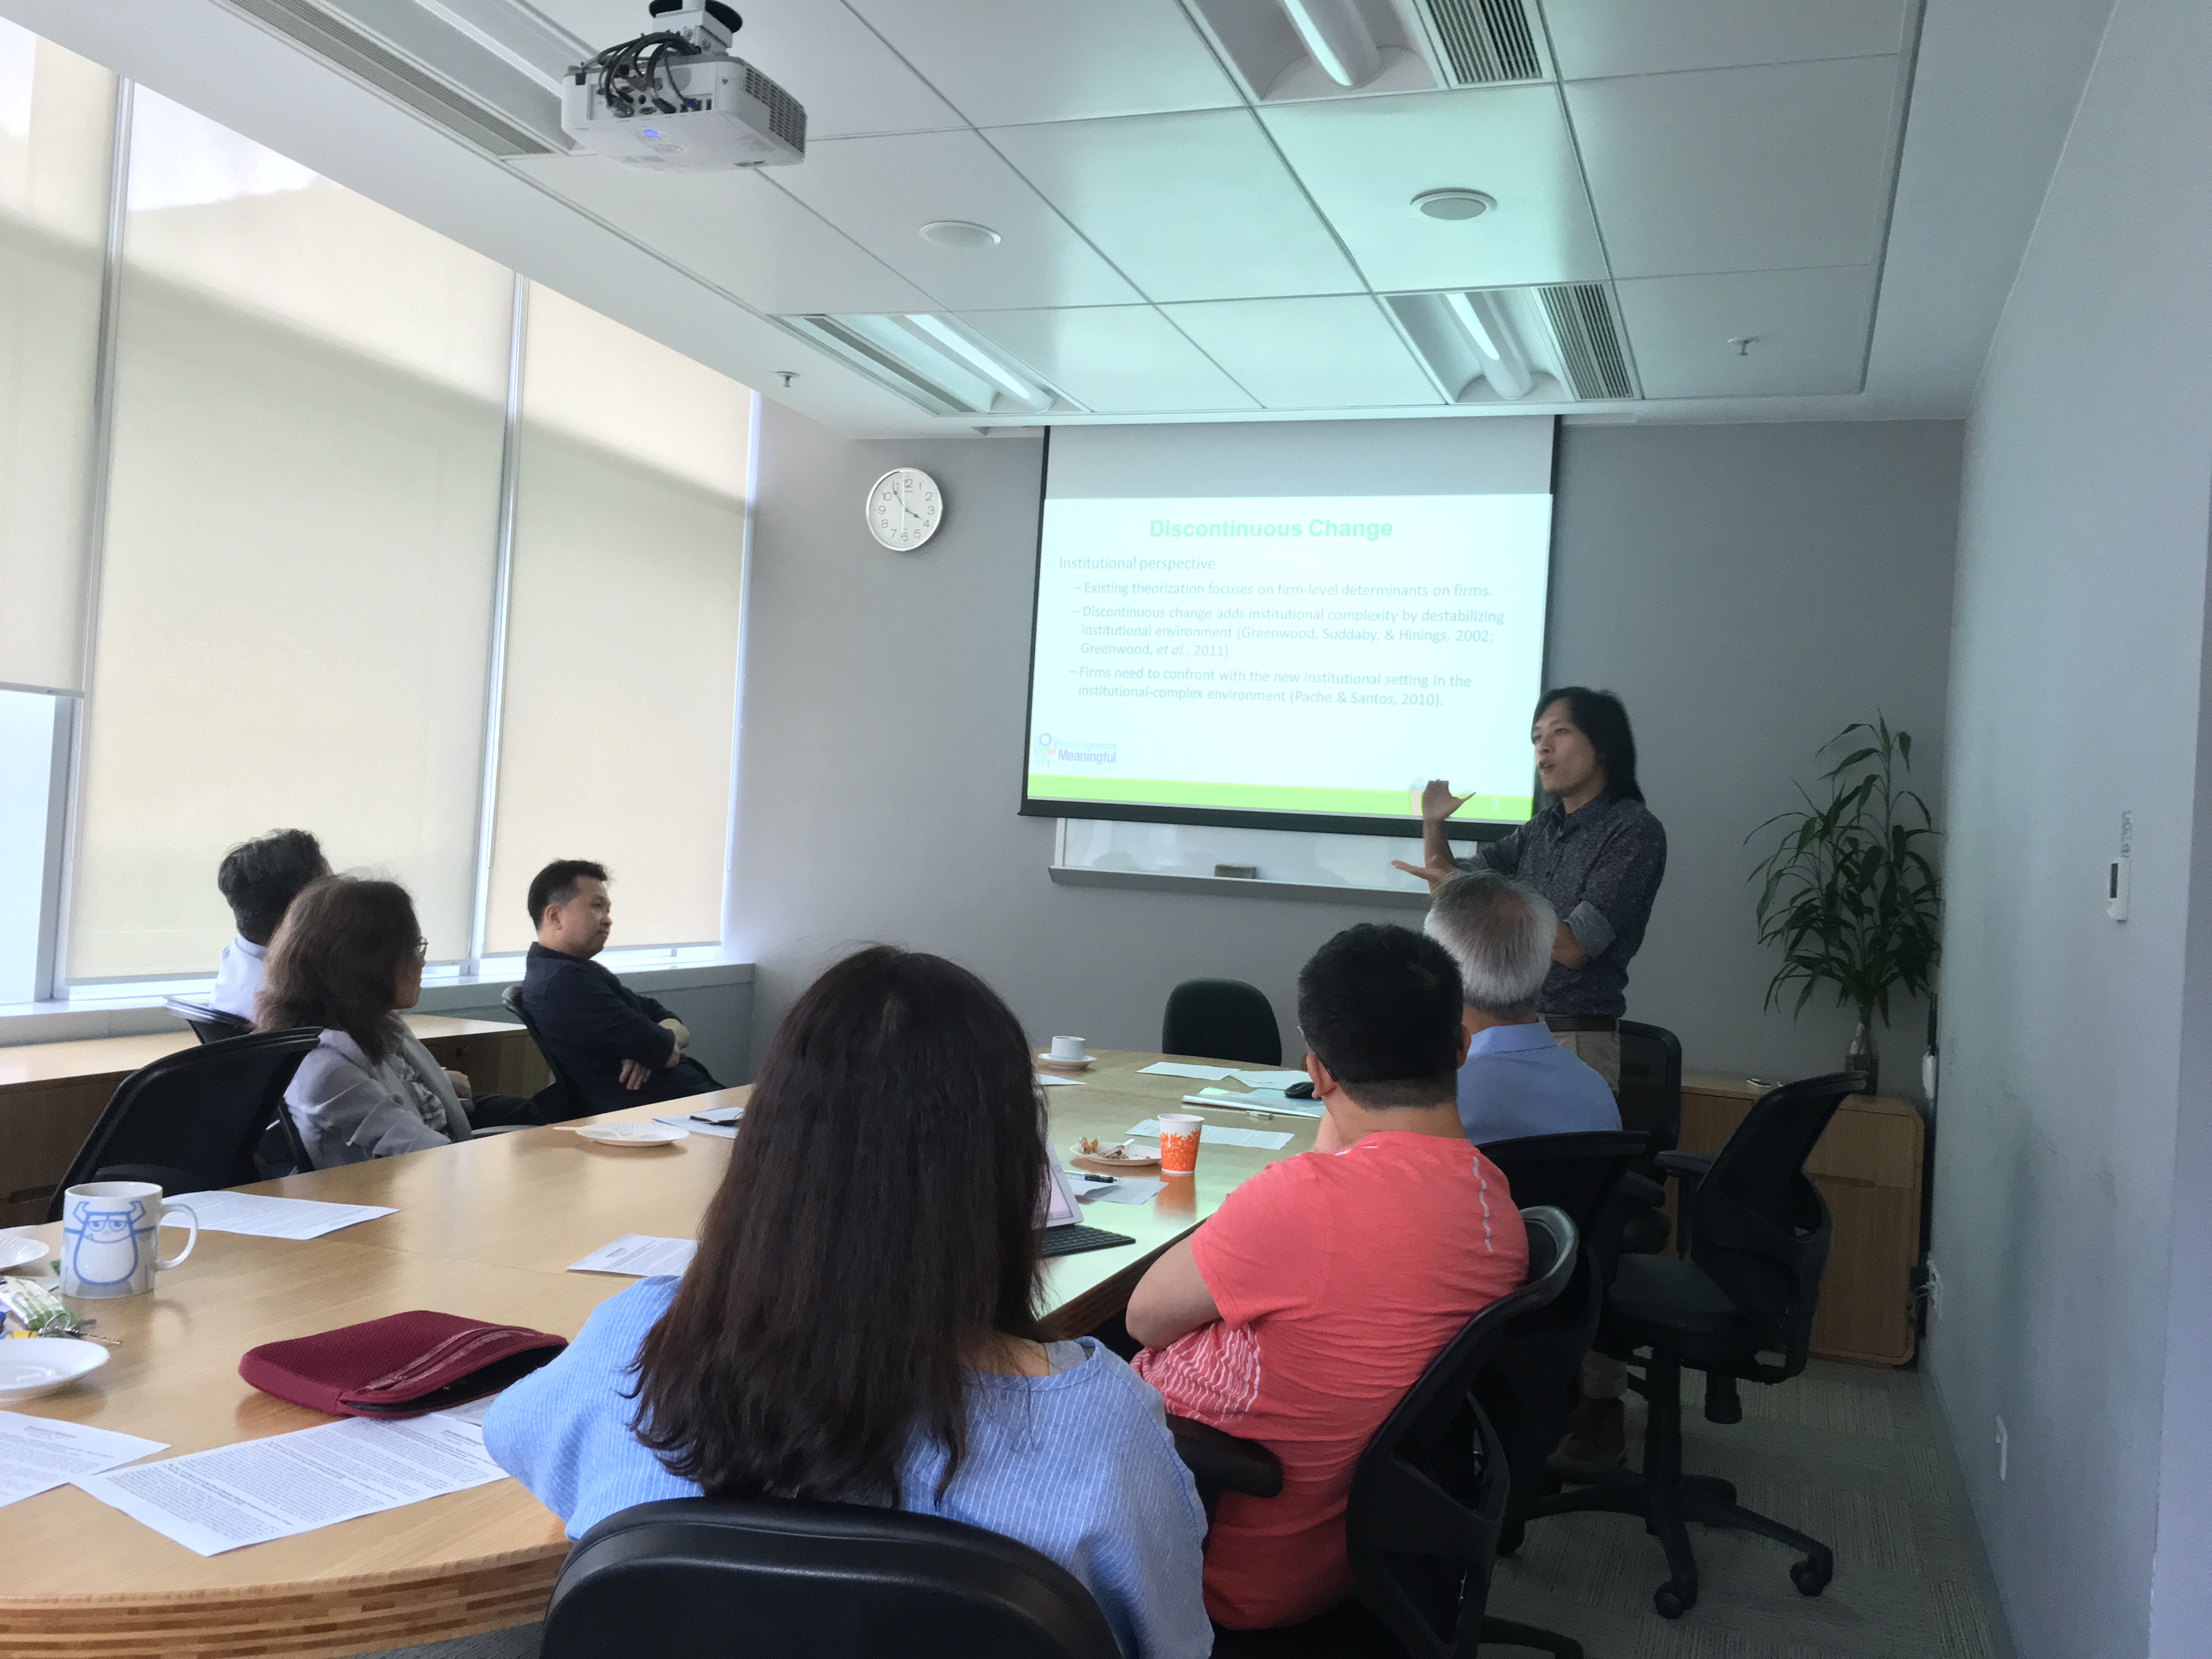 Dr. Frank Ng shares on “Play Your Cards Right: Contrasting Effects of Boundary-Spanning Strategies by Discontinuous Changes”